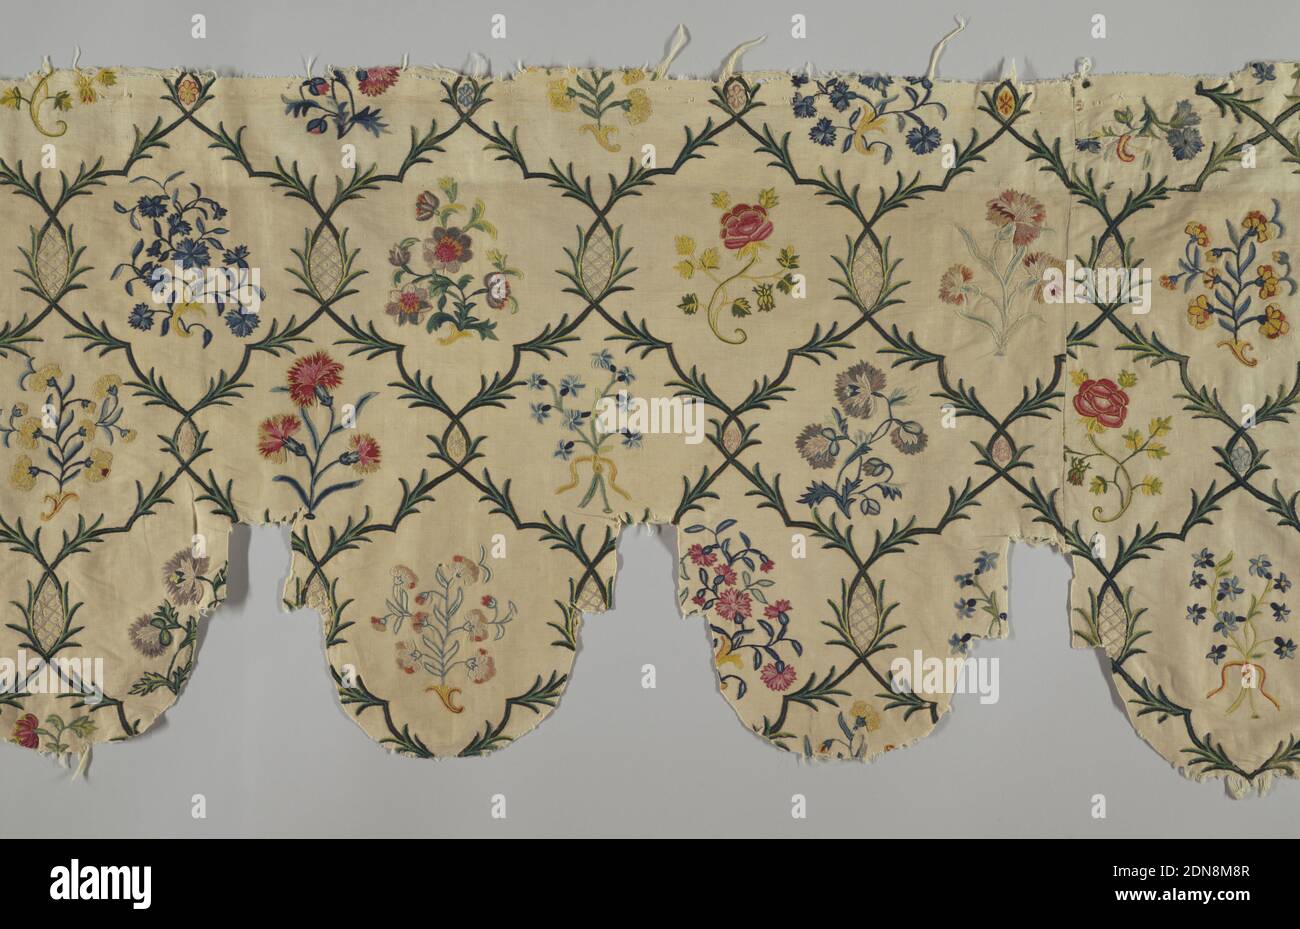 Valance, Medium: cotton, wool Technique: chain stitch embroidery on plain weave, Textile cut and pieced to form a valence with deep rounded scallops. Branches interlace to form a rounded lattice design, each ogive framing a small naturalistic spray of roses, forget-me-nots, carnations, etc. Colors are bright and with many variations of blue, green, yellow, pink and violet on an off-white ground., France, late 18th century, embroidery & stitching, Valance Stock Photo